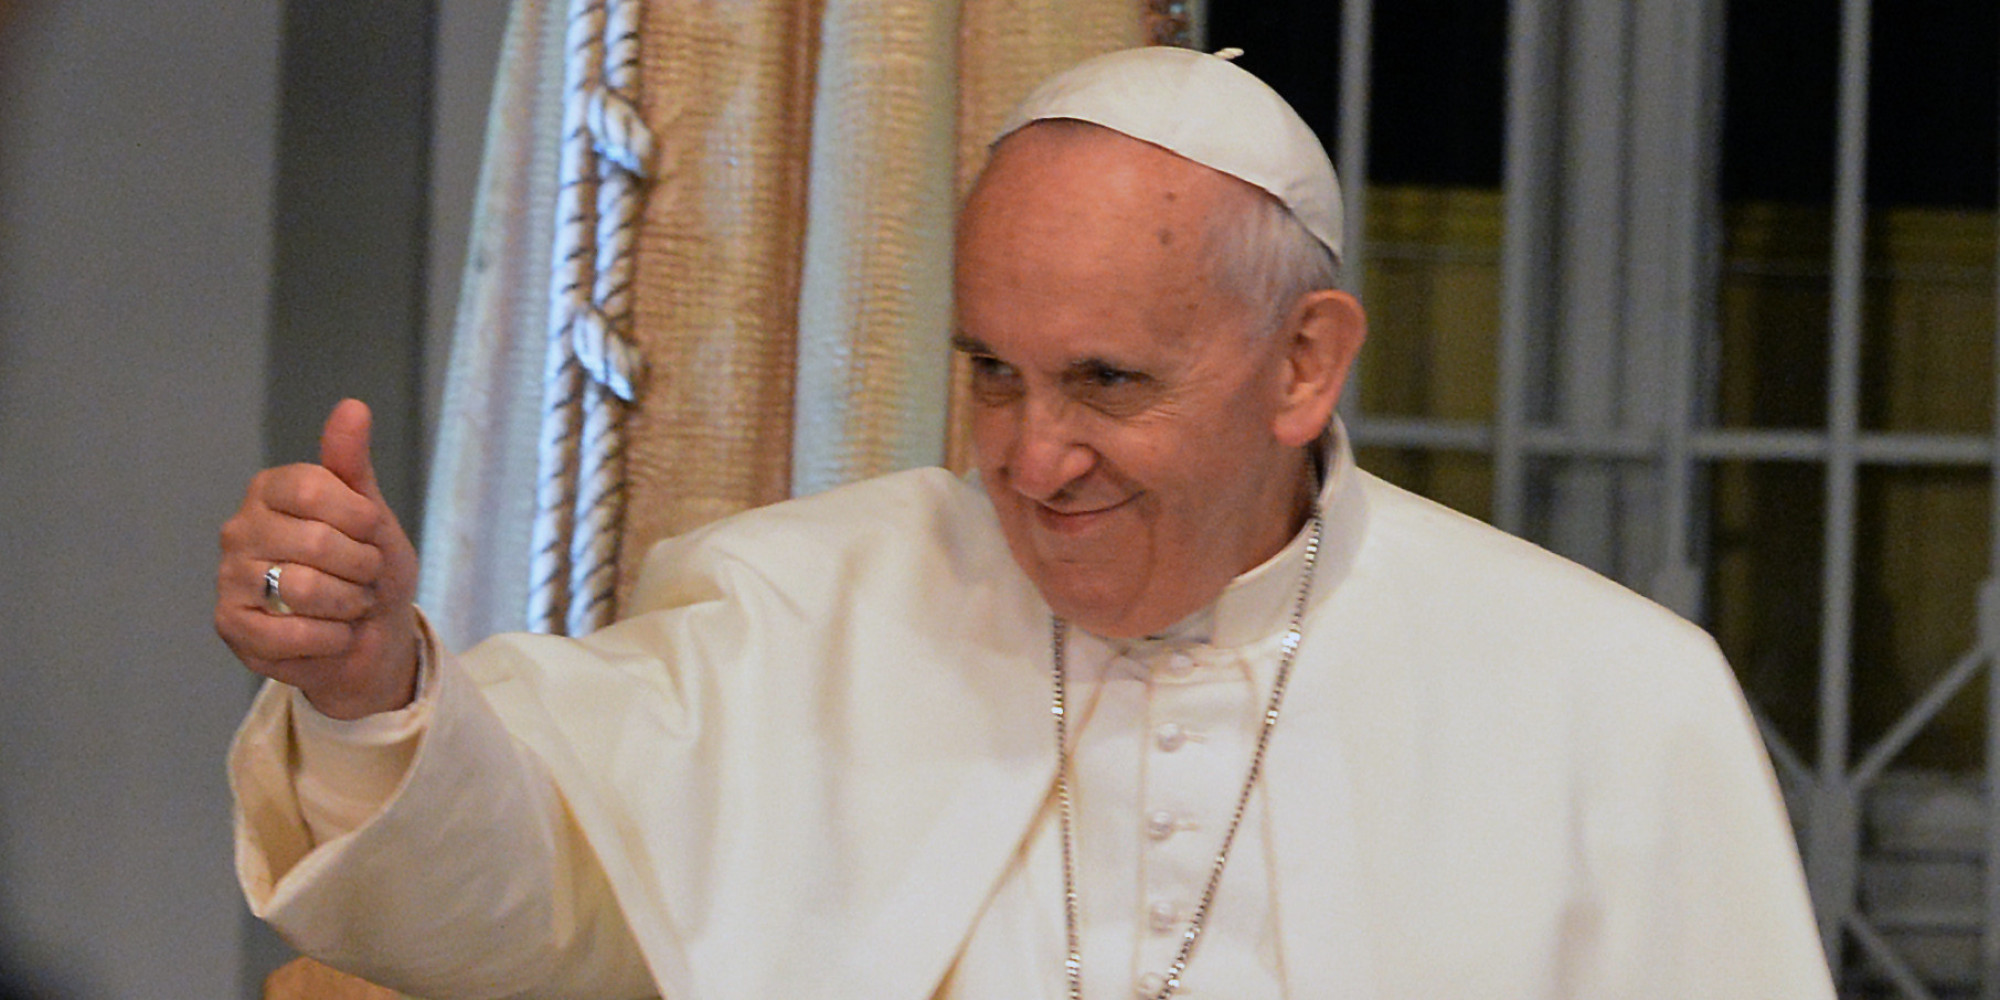 o-POPE-FRANCIS-THUMBS-UP-facebook.jpg